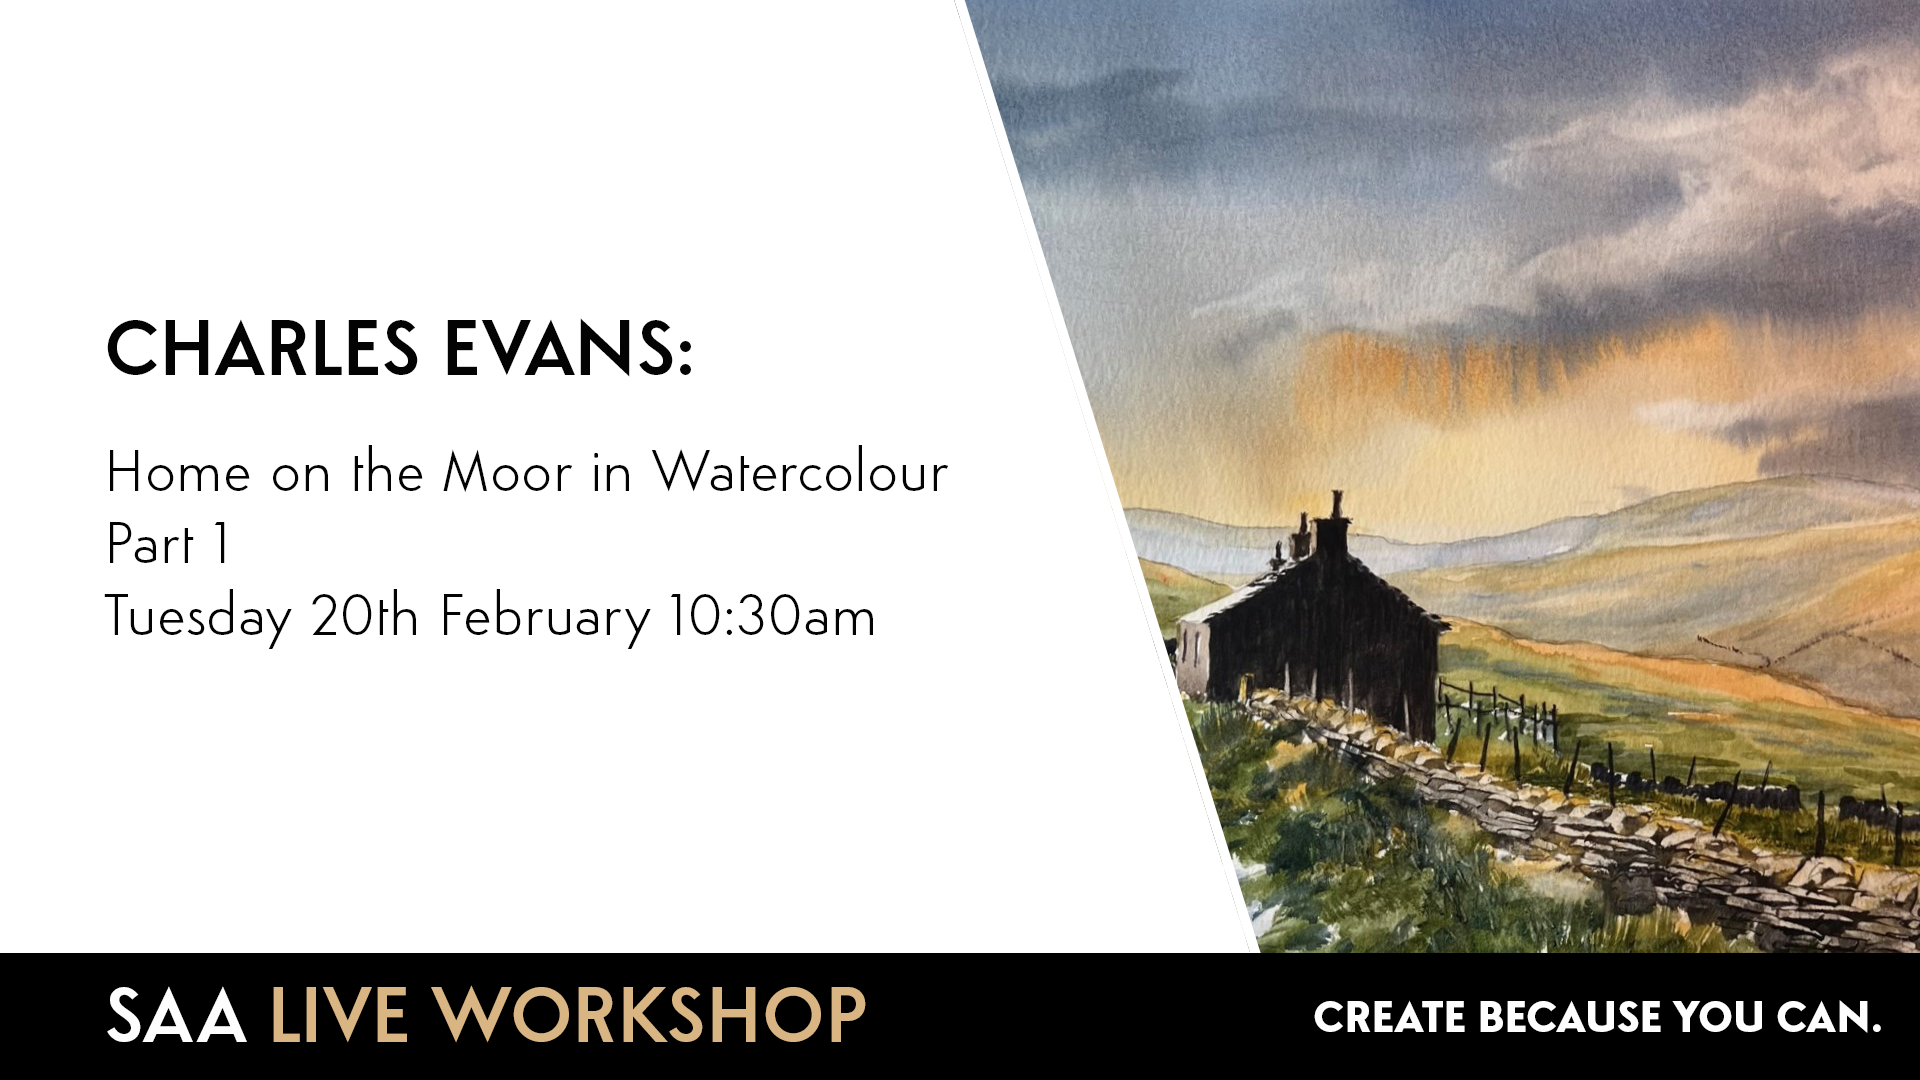 SAA Live – Charles Evans watercolour painting workshop – Home on the Moor